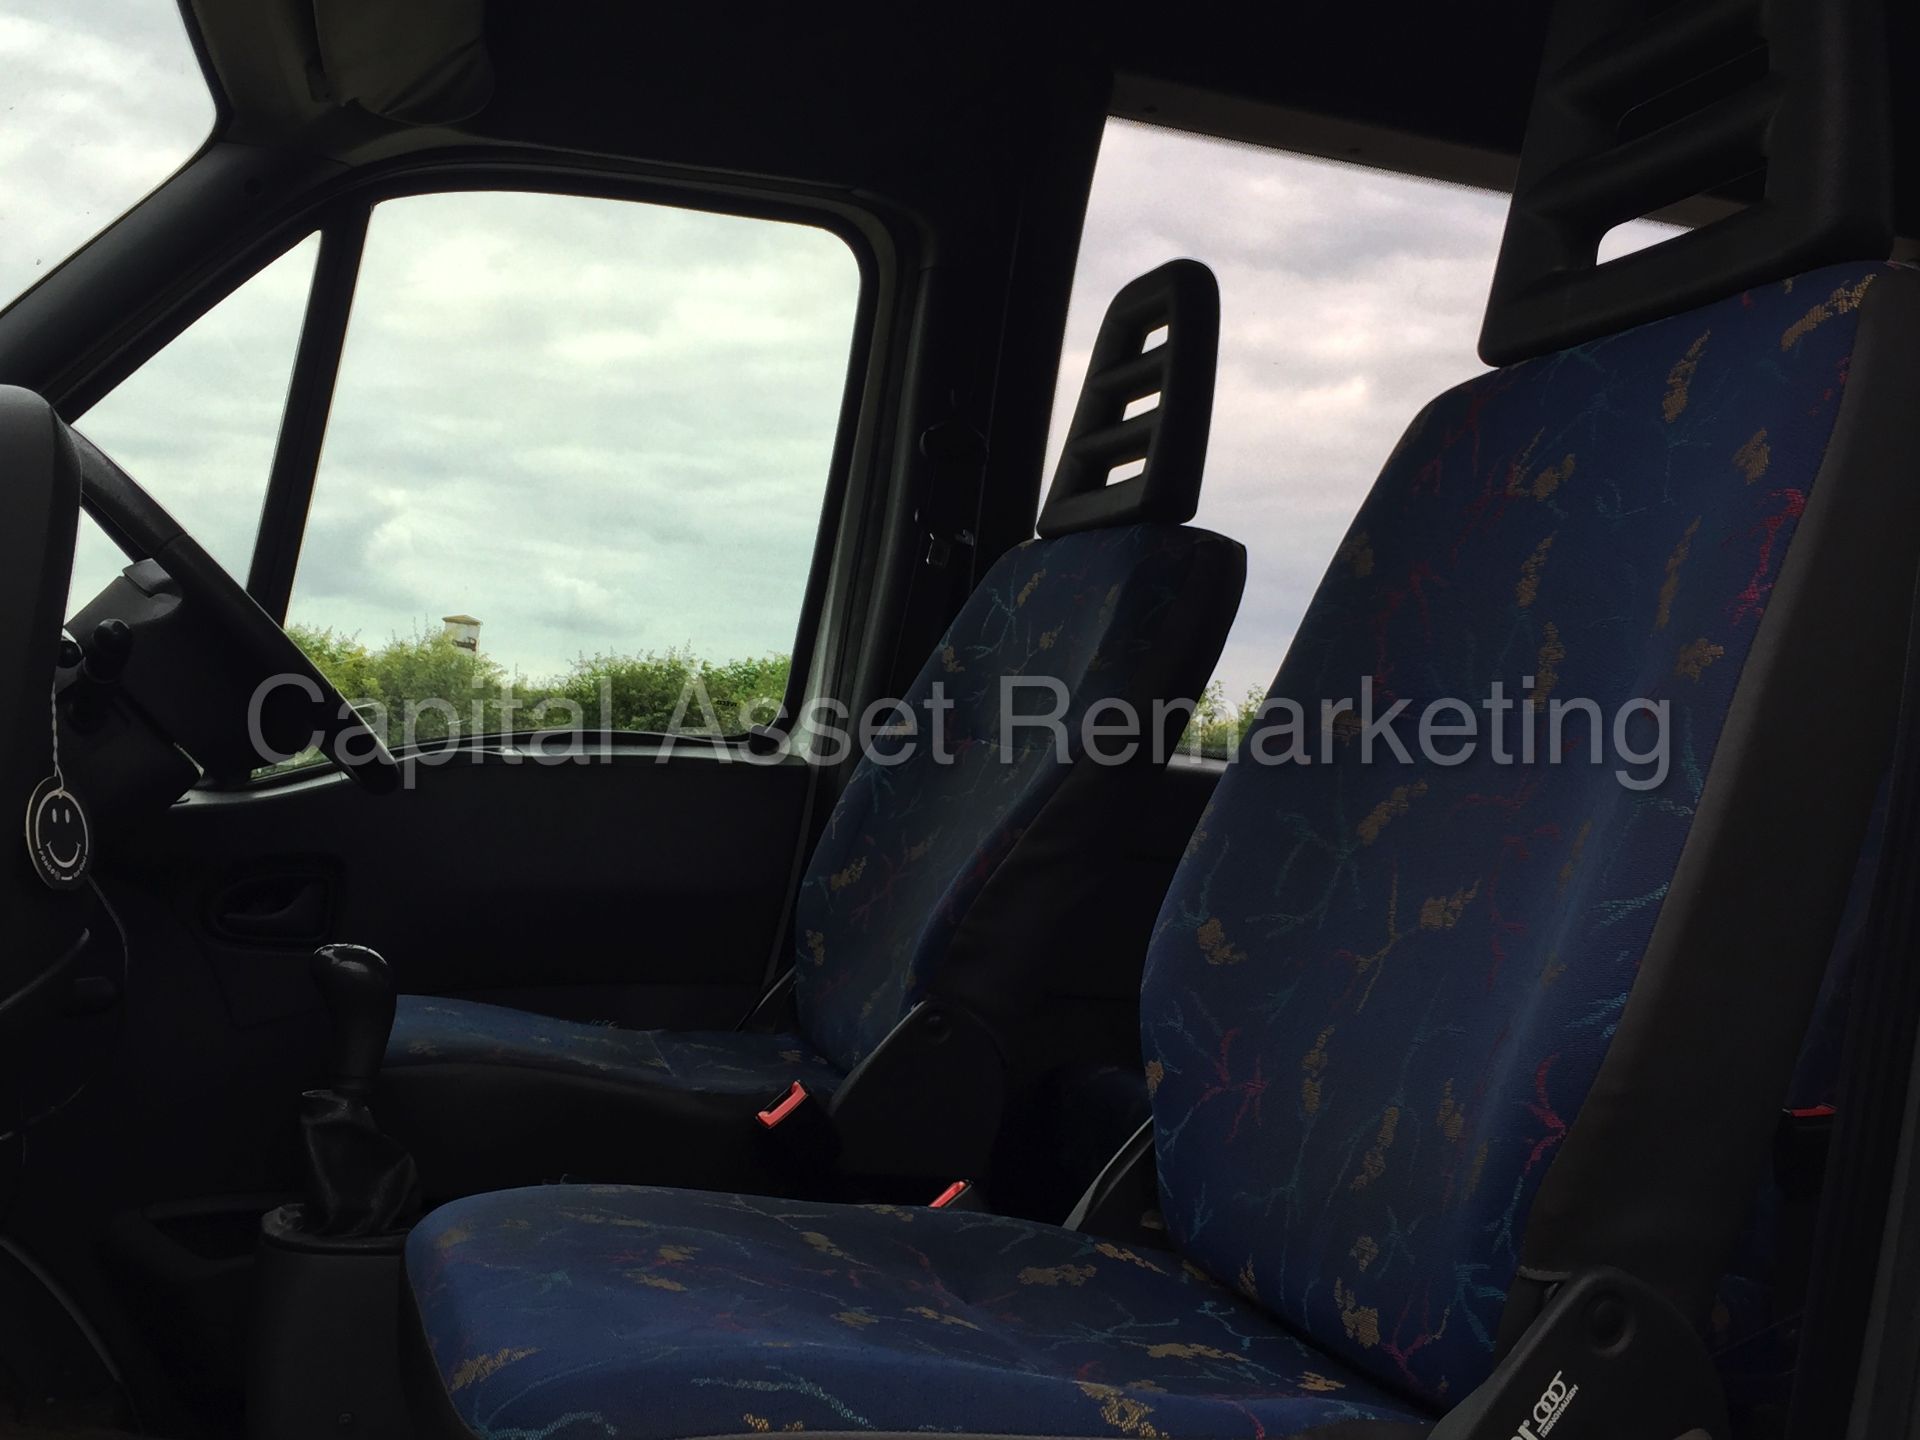 (on sale) IVECO DAILY 35S13 '14 SEATER MINI-BUS' (2003 - 03 REG) '2.3 DIESEL - 6 SPEED' (NO VAT) - Image 21 of 23